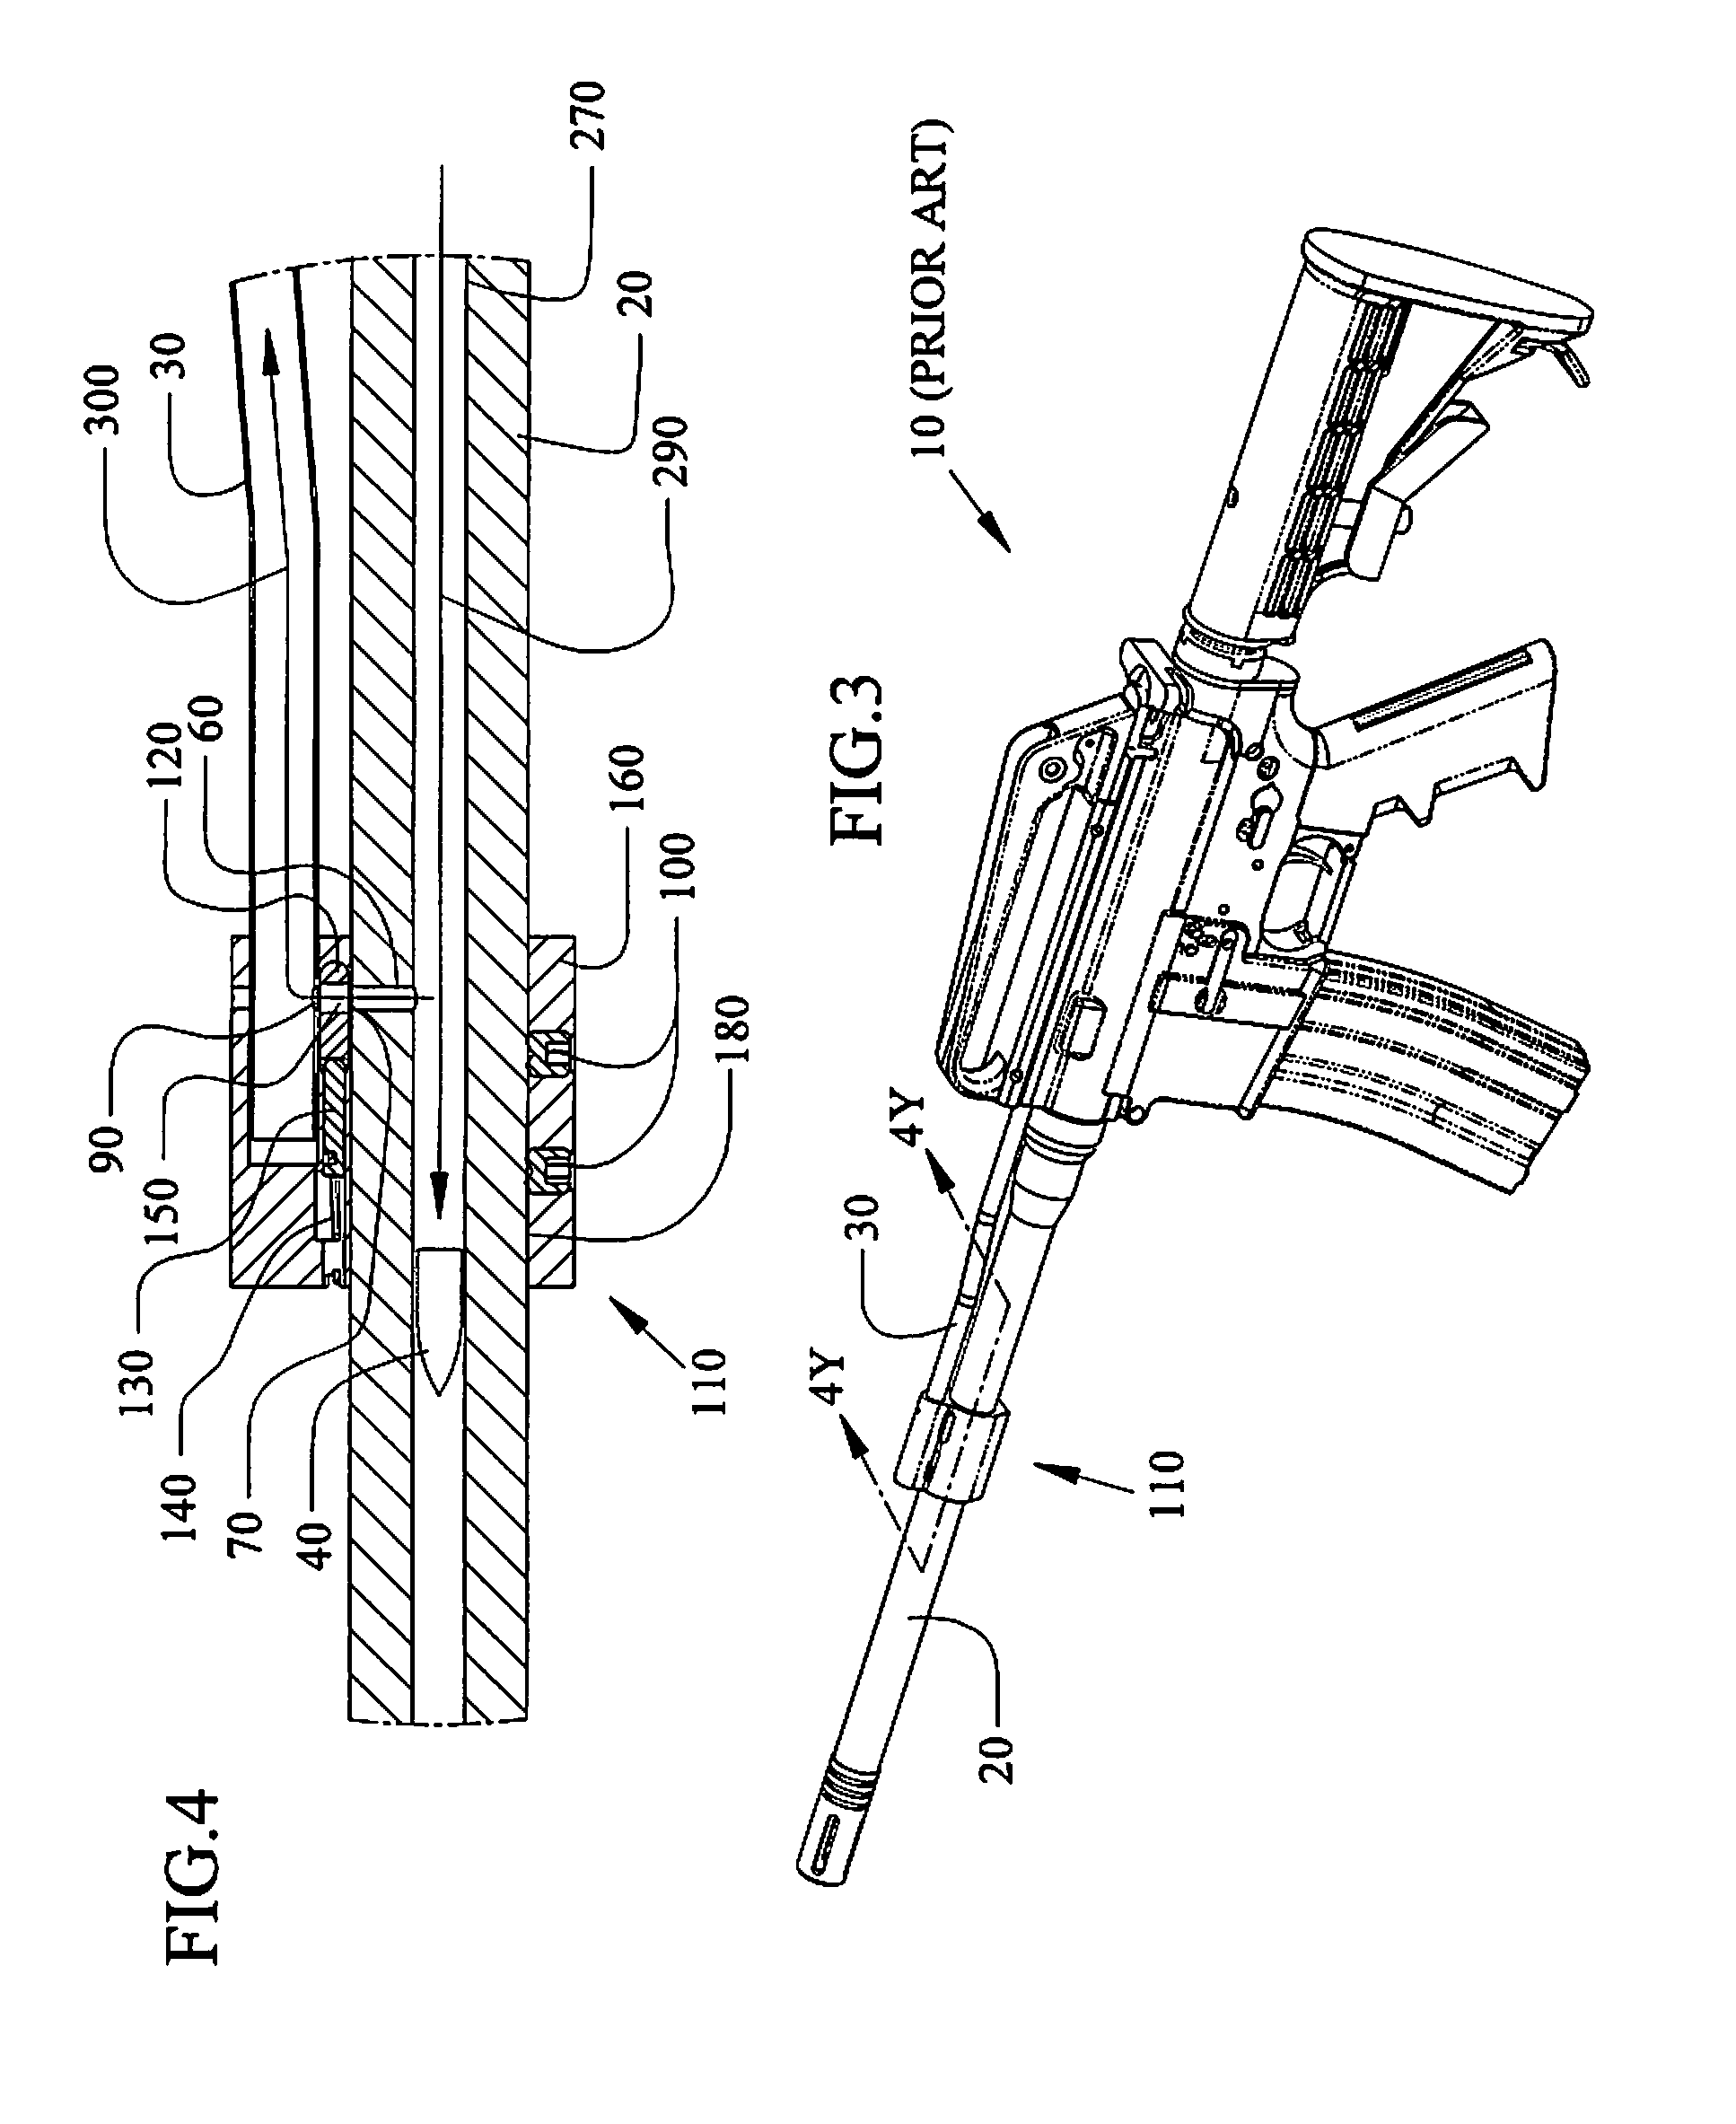 Adjustable gas block method, system and device for a gas operation firearm